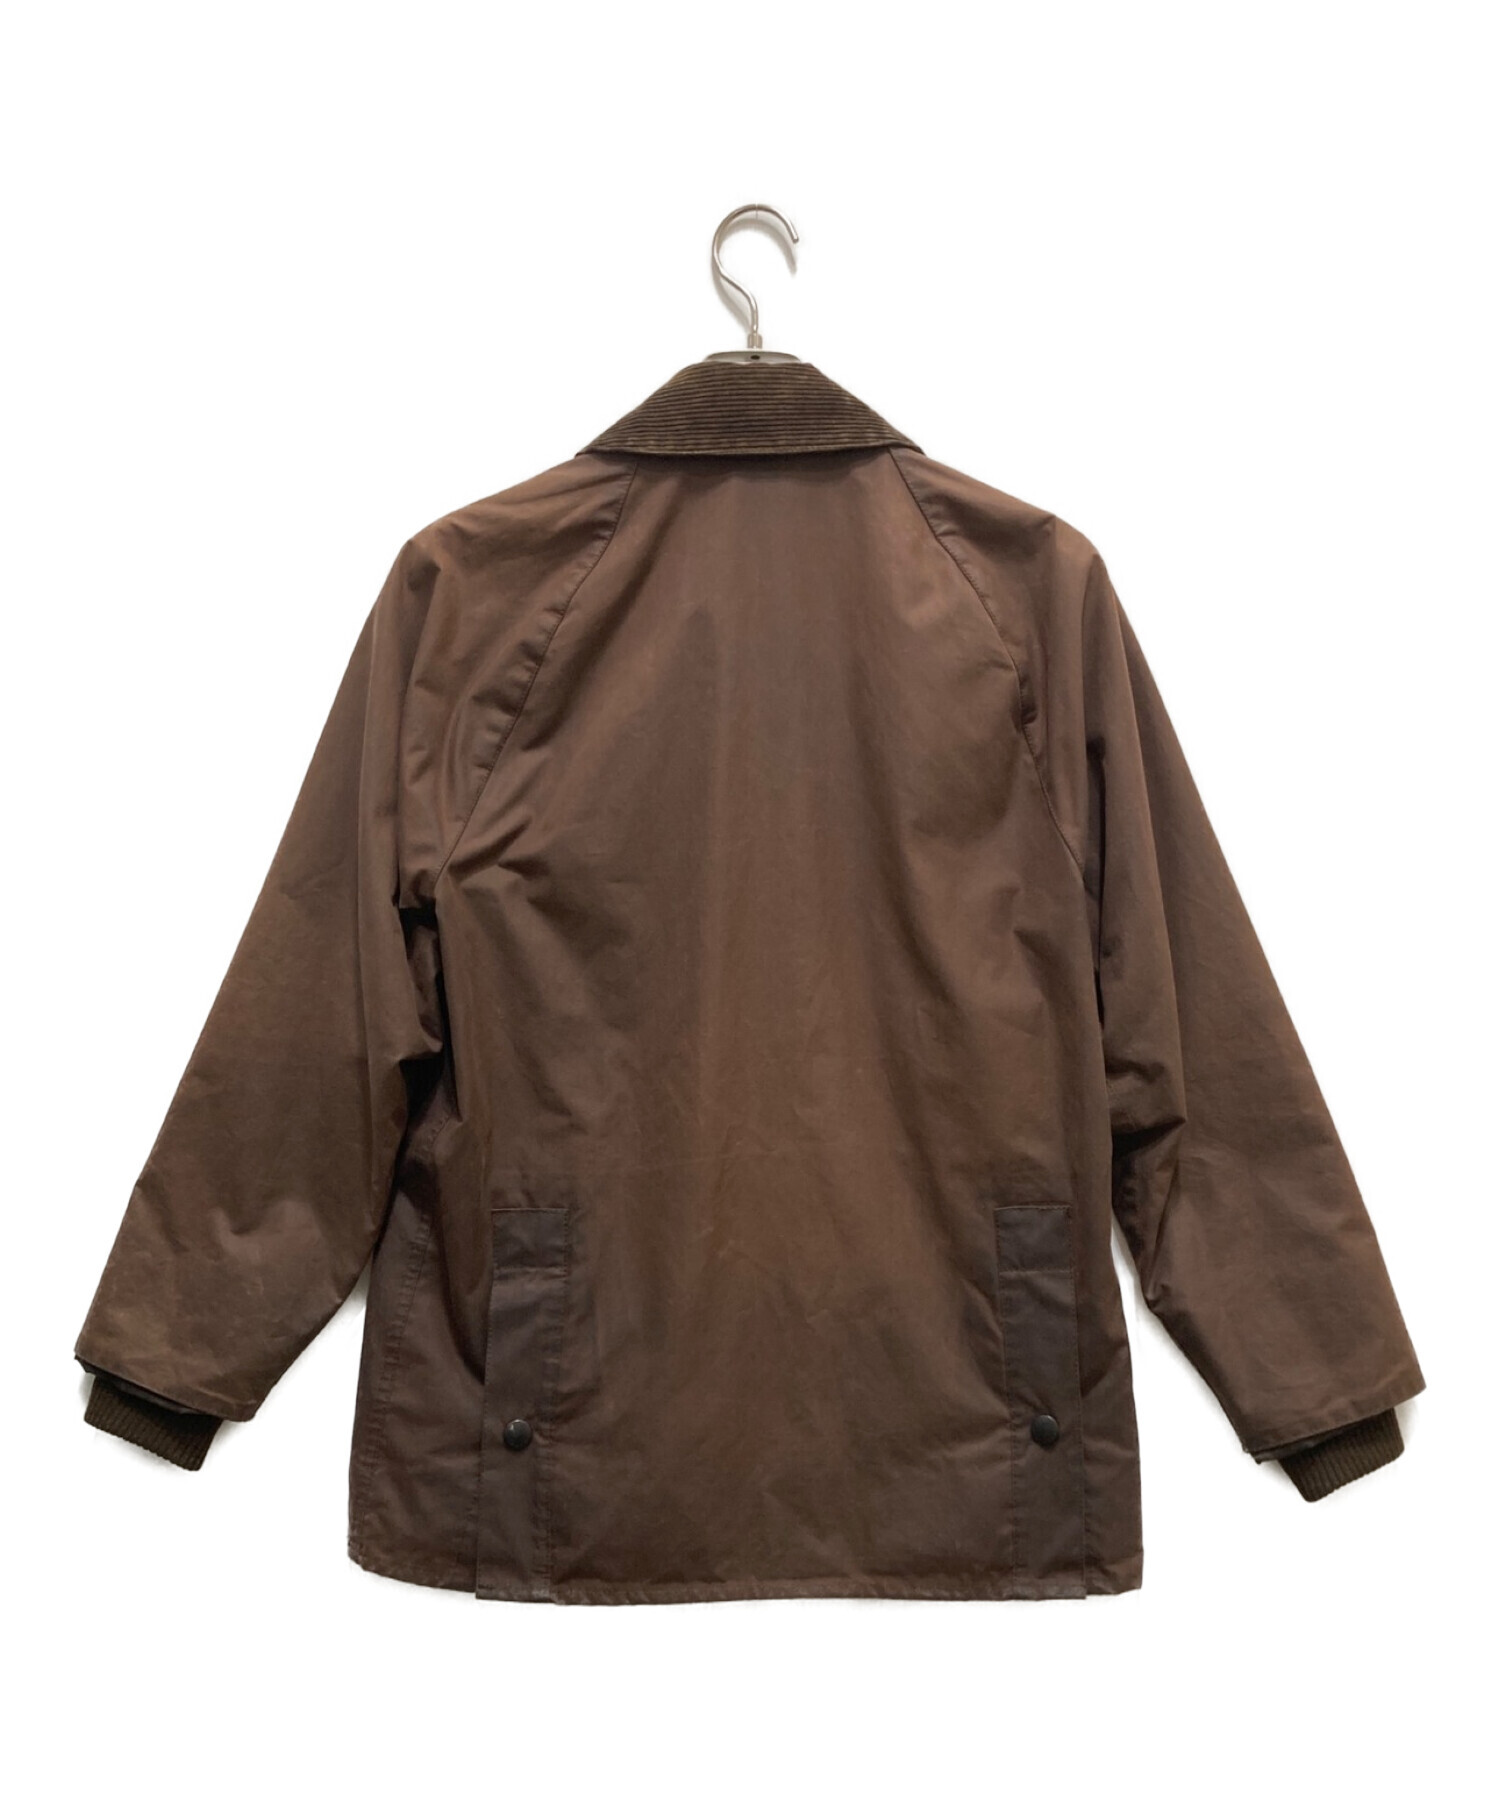 Barbour (バブアー) BEDALE JACKET ブラウン サイズ:34